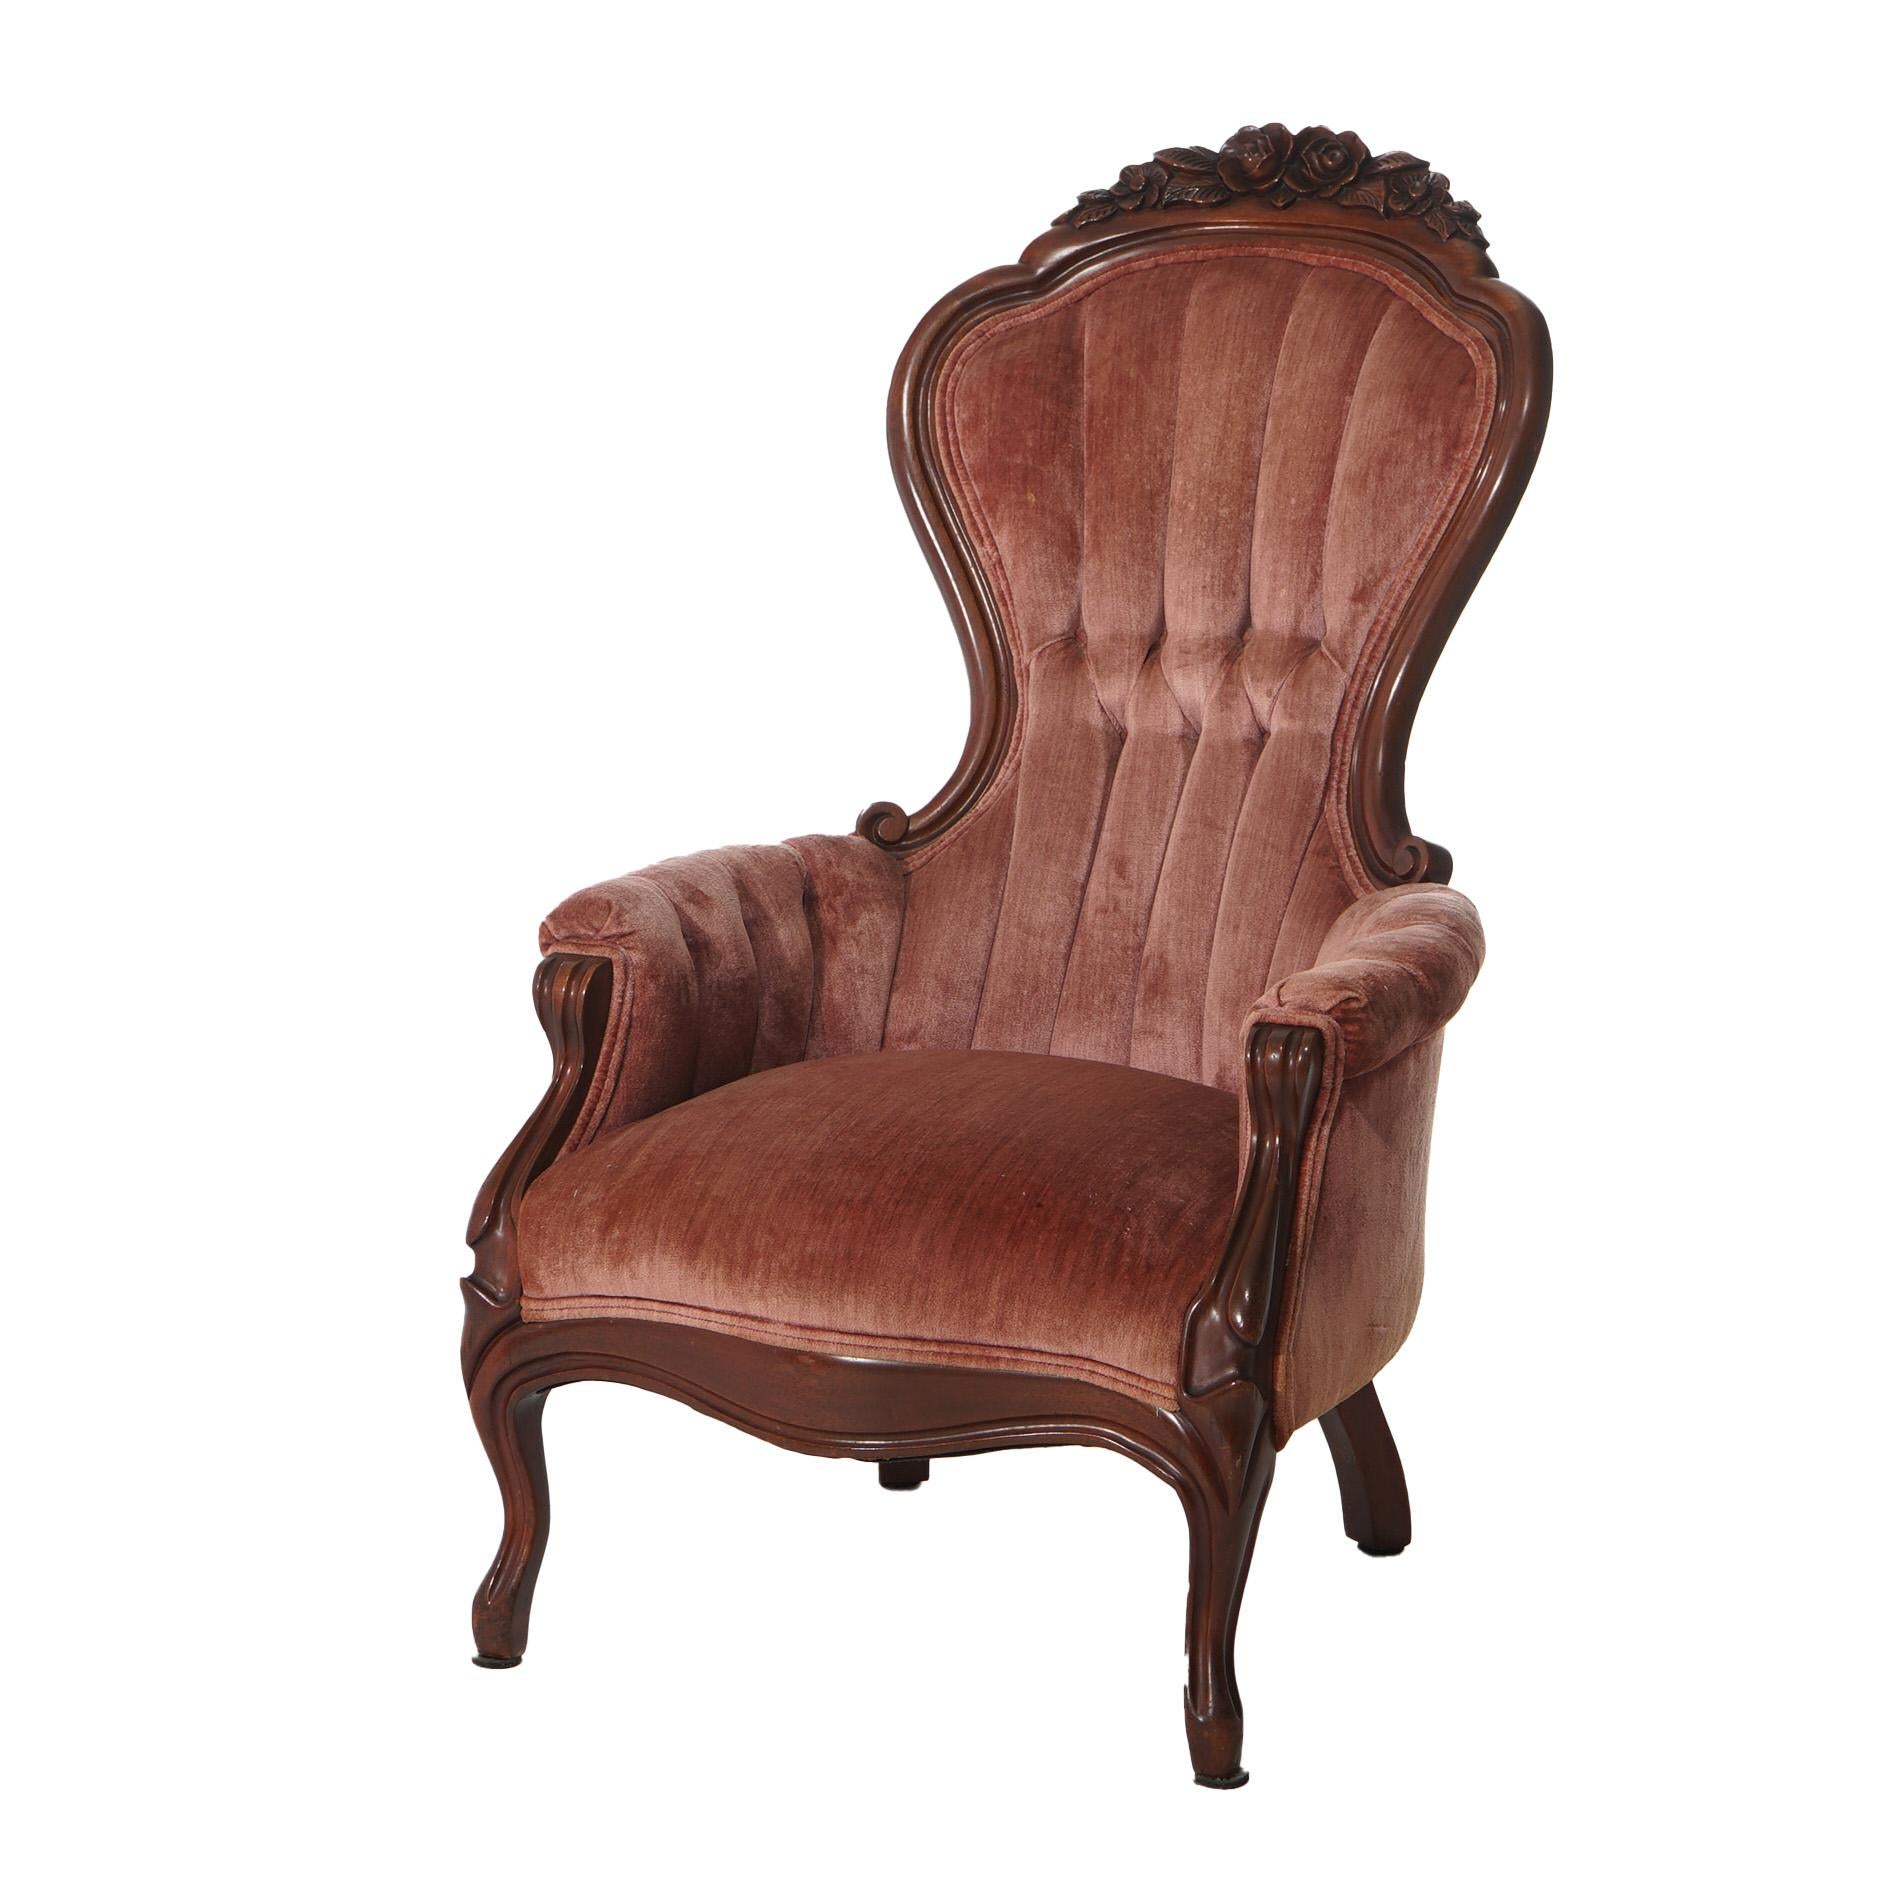 19th Century Antique Oversized Carved Walnut Armchair with Carved Floral Elements C1890 For Sale